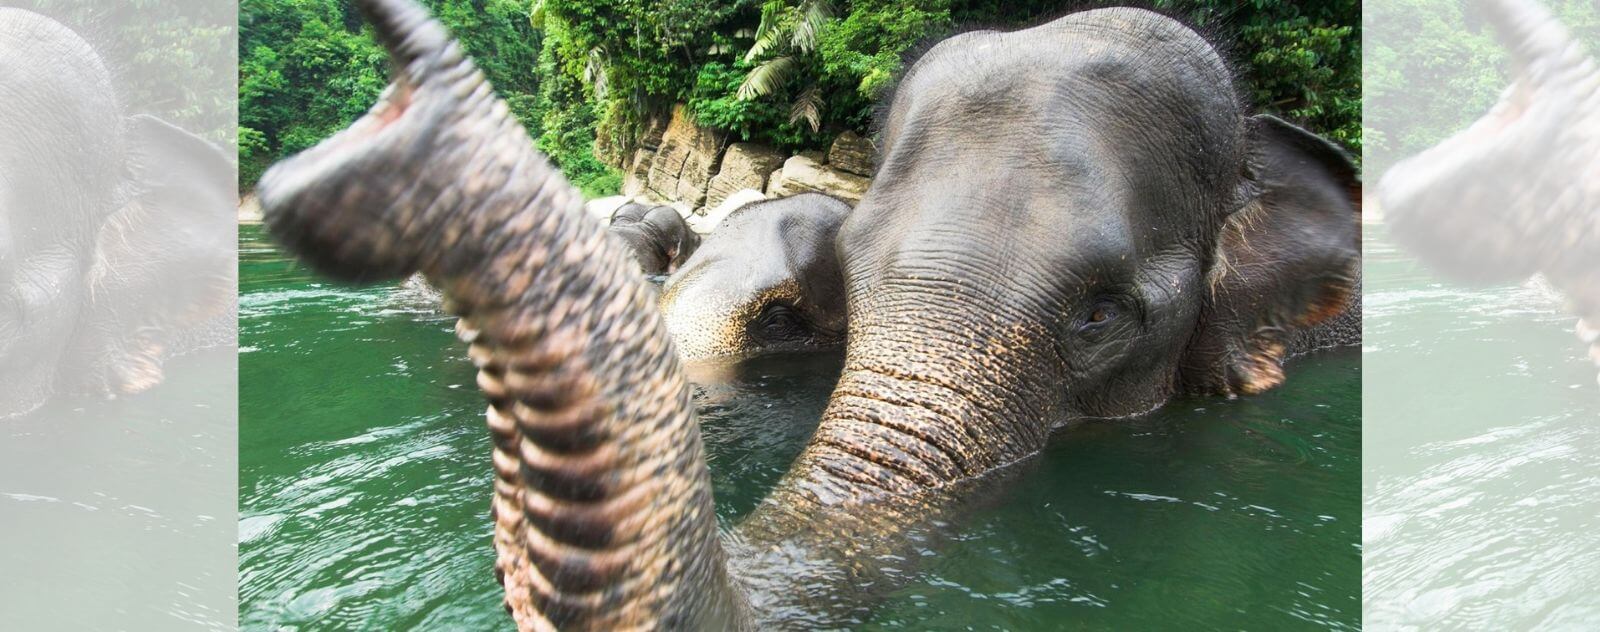 Asian Elephant in the Water of a River